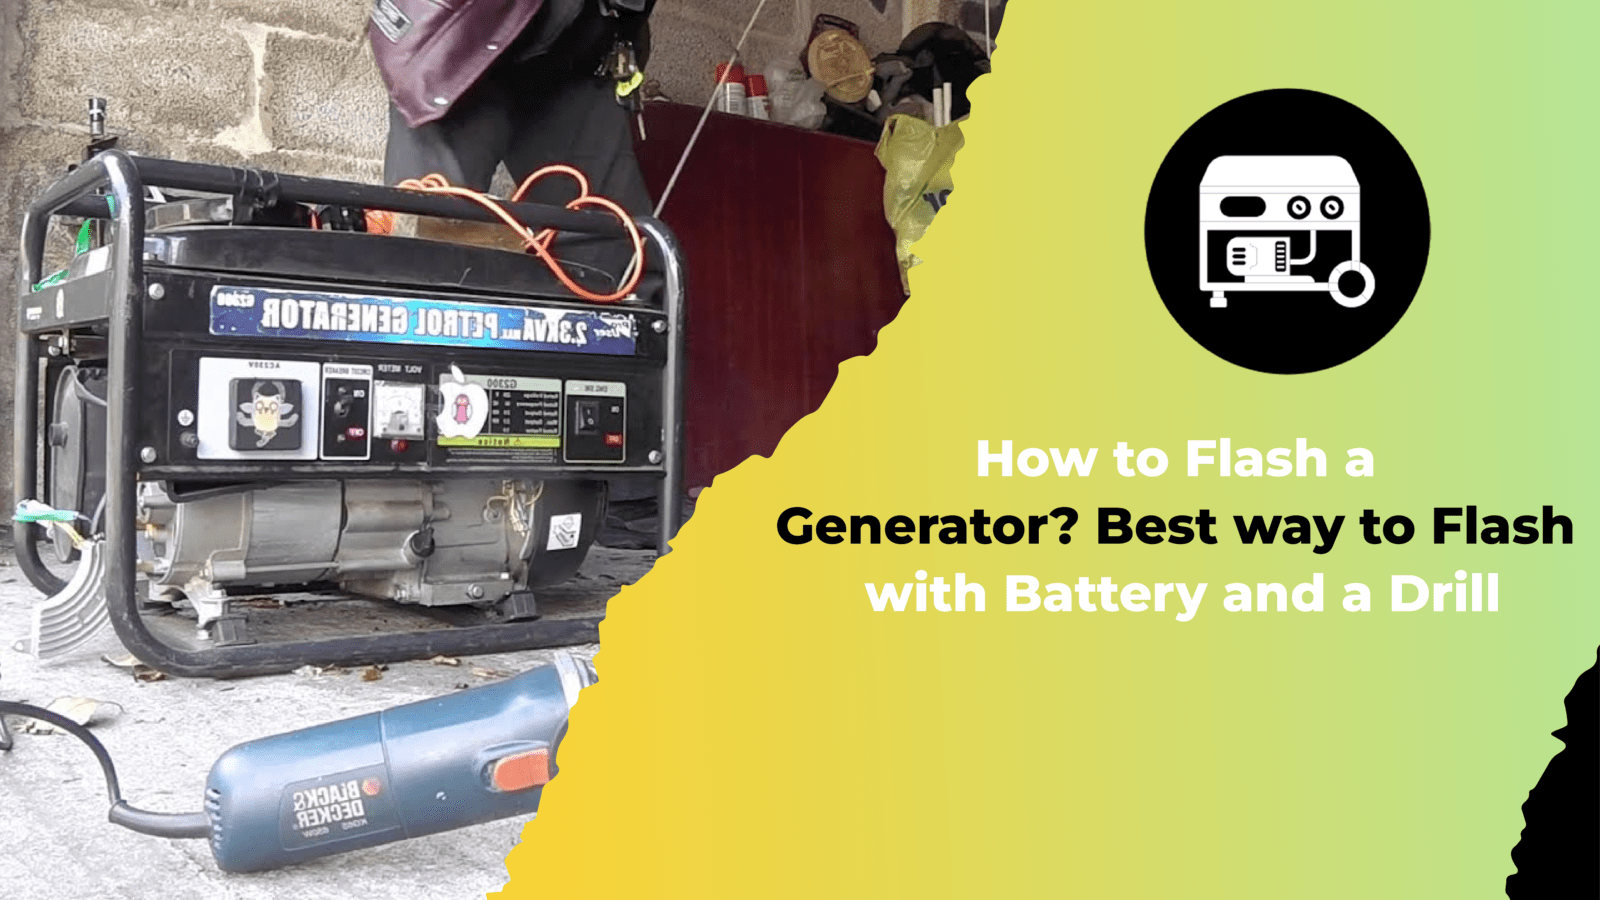 How to Flash a Generator Best way to Flash with Battery and a Drill